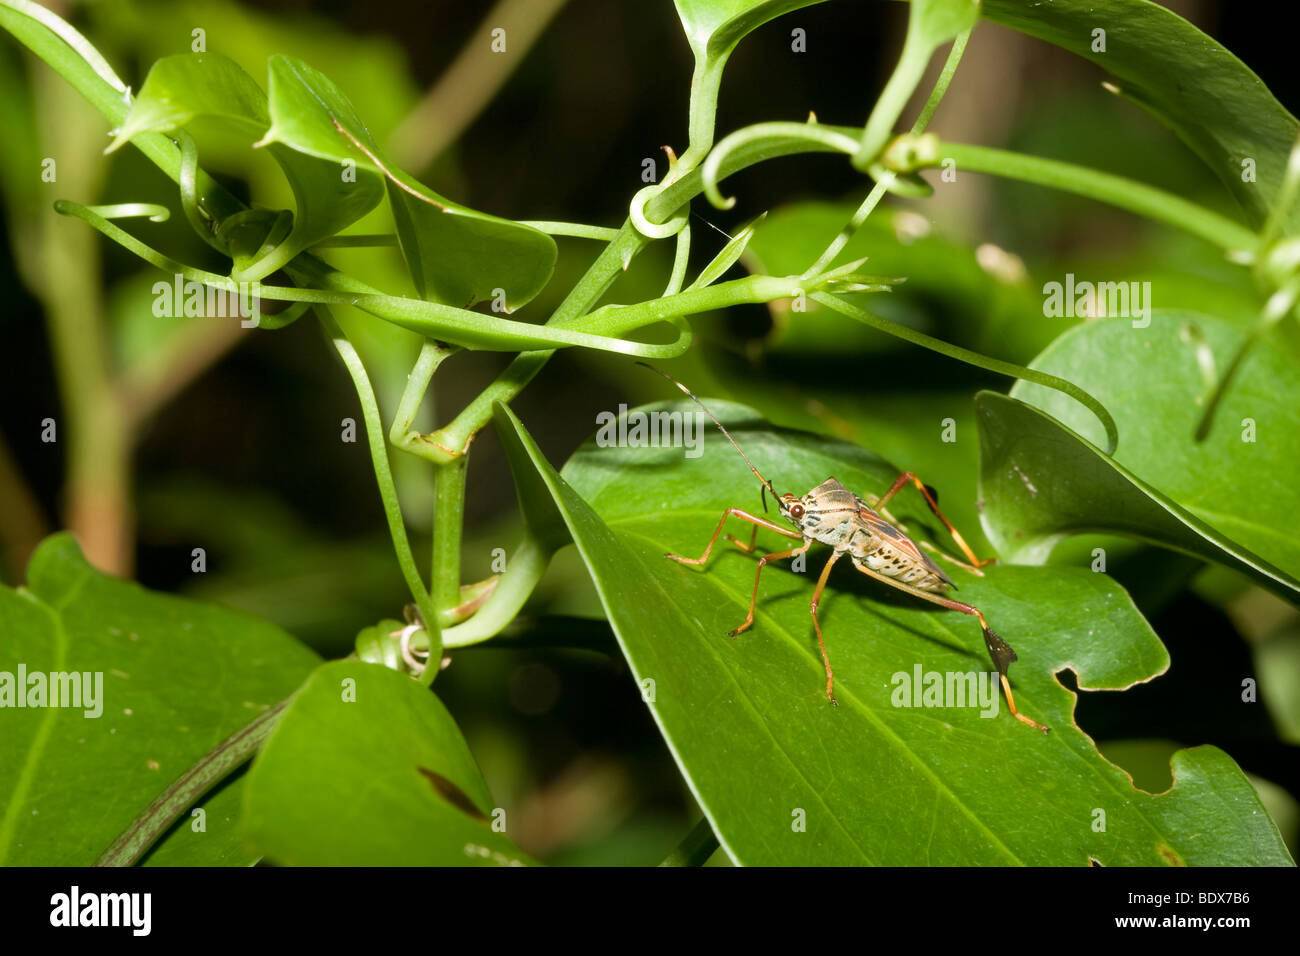 Leaf-footed bug, order Hemiptera, family Coreidae, among tangled vines. Photographed in the mountains of Costa Rica. Stock Photo